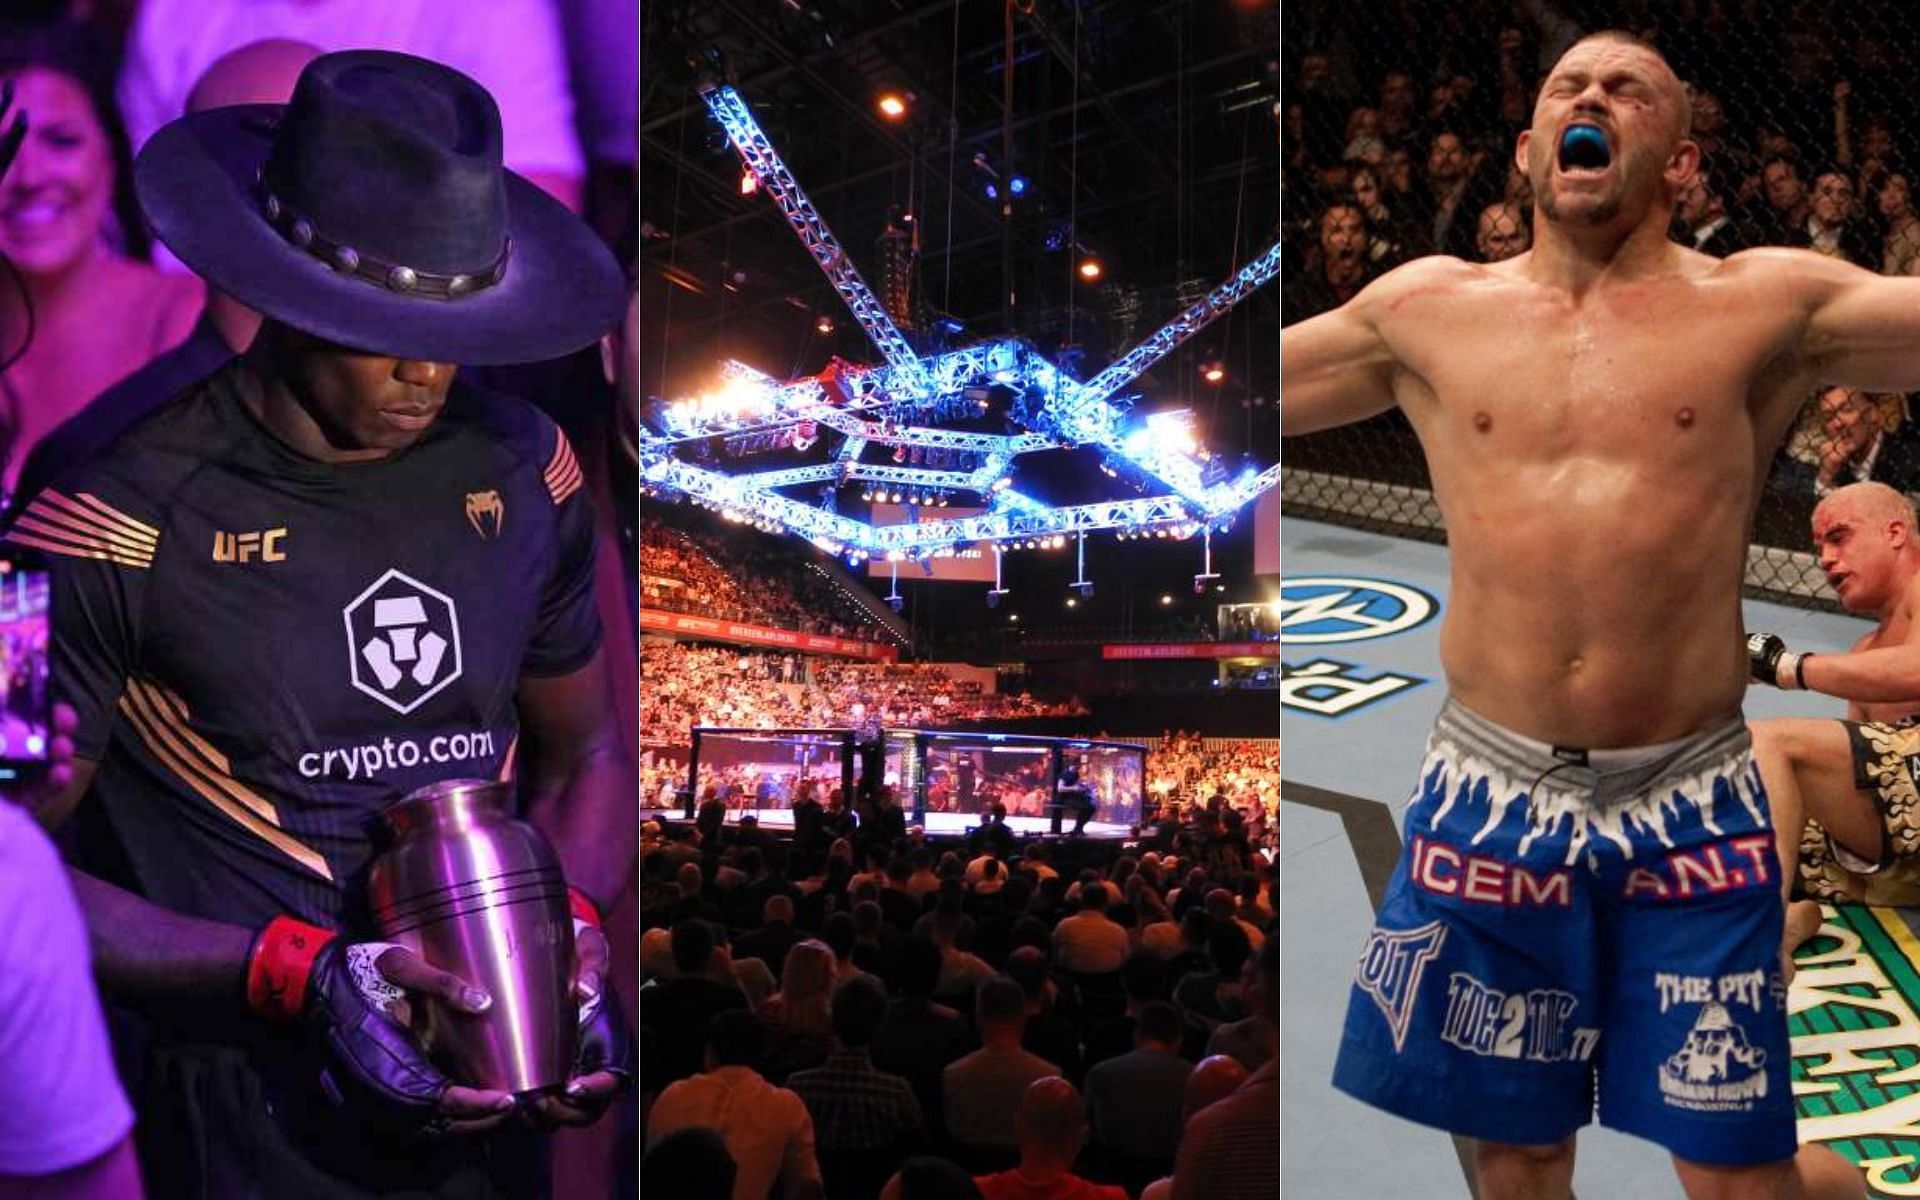 Flashy entrances, moving their Fight Night shows on the road and bringing back personalised attire could help to freshen up the UFC